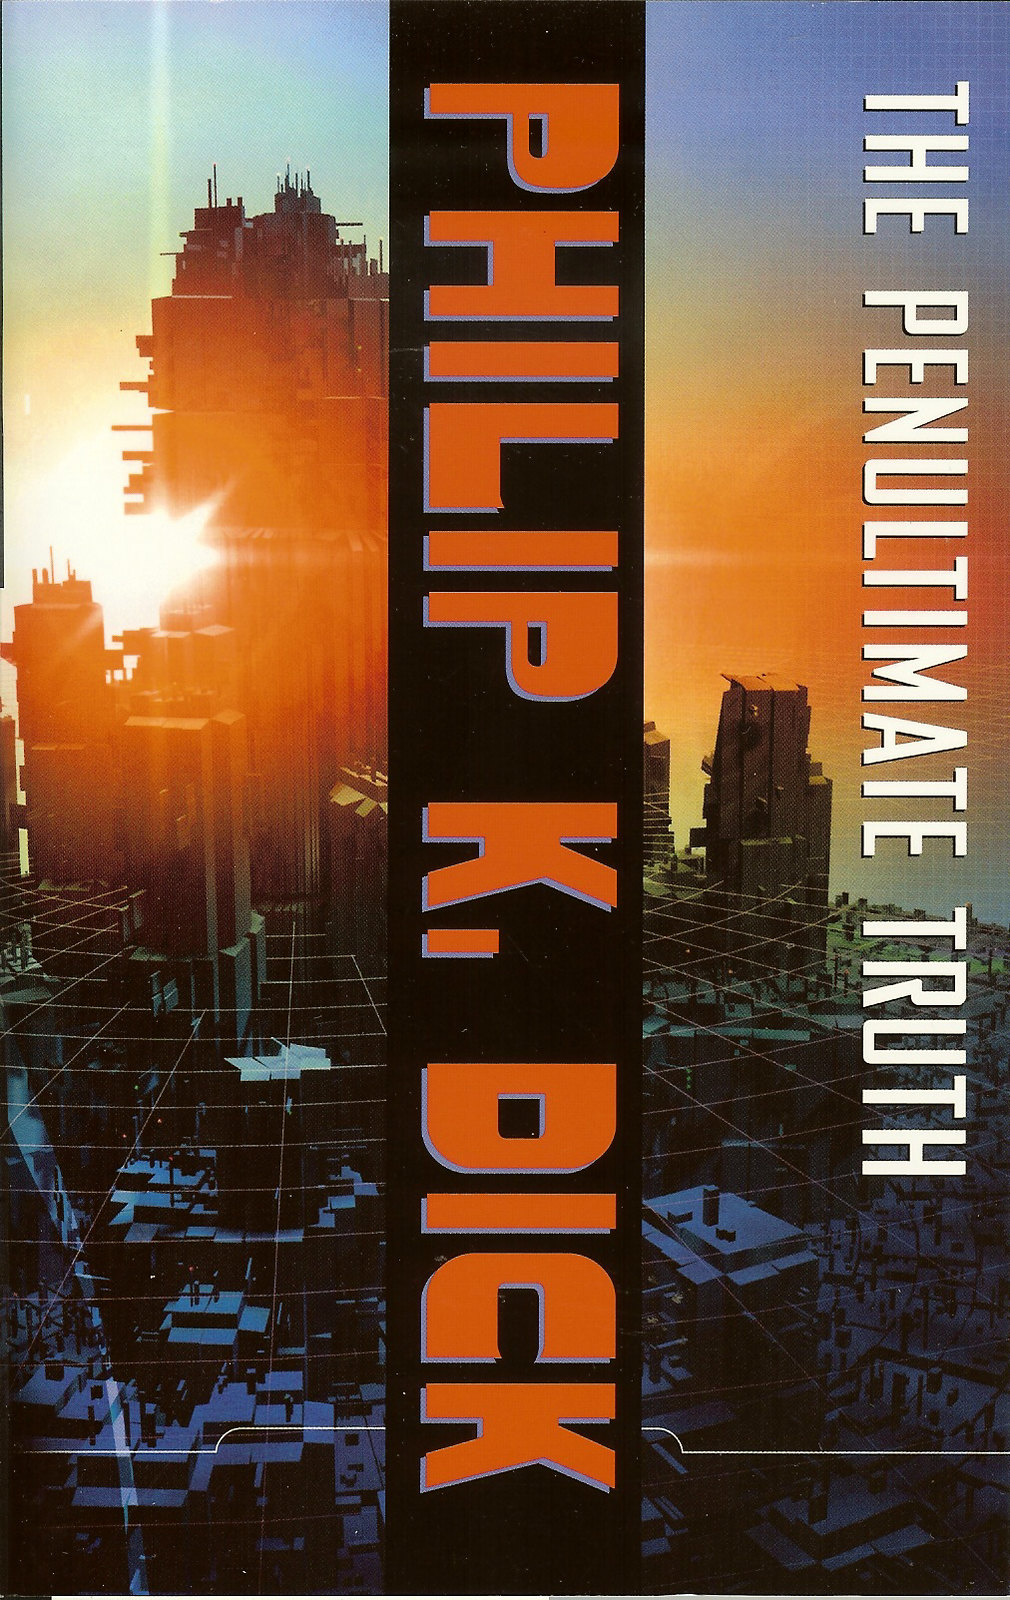 The Penultimate Truth - Philip Kindred Dick